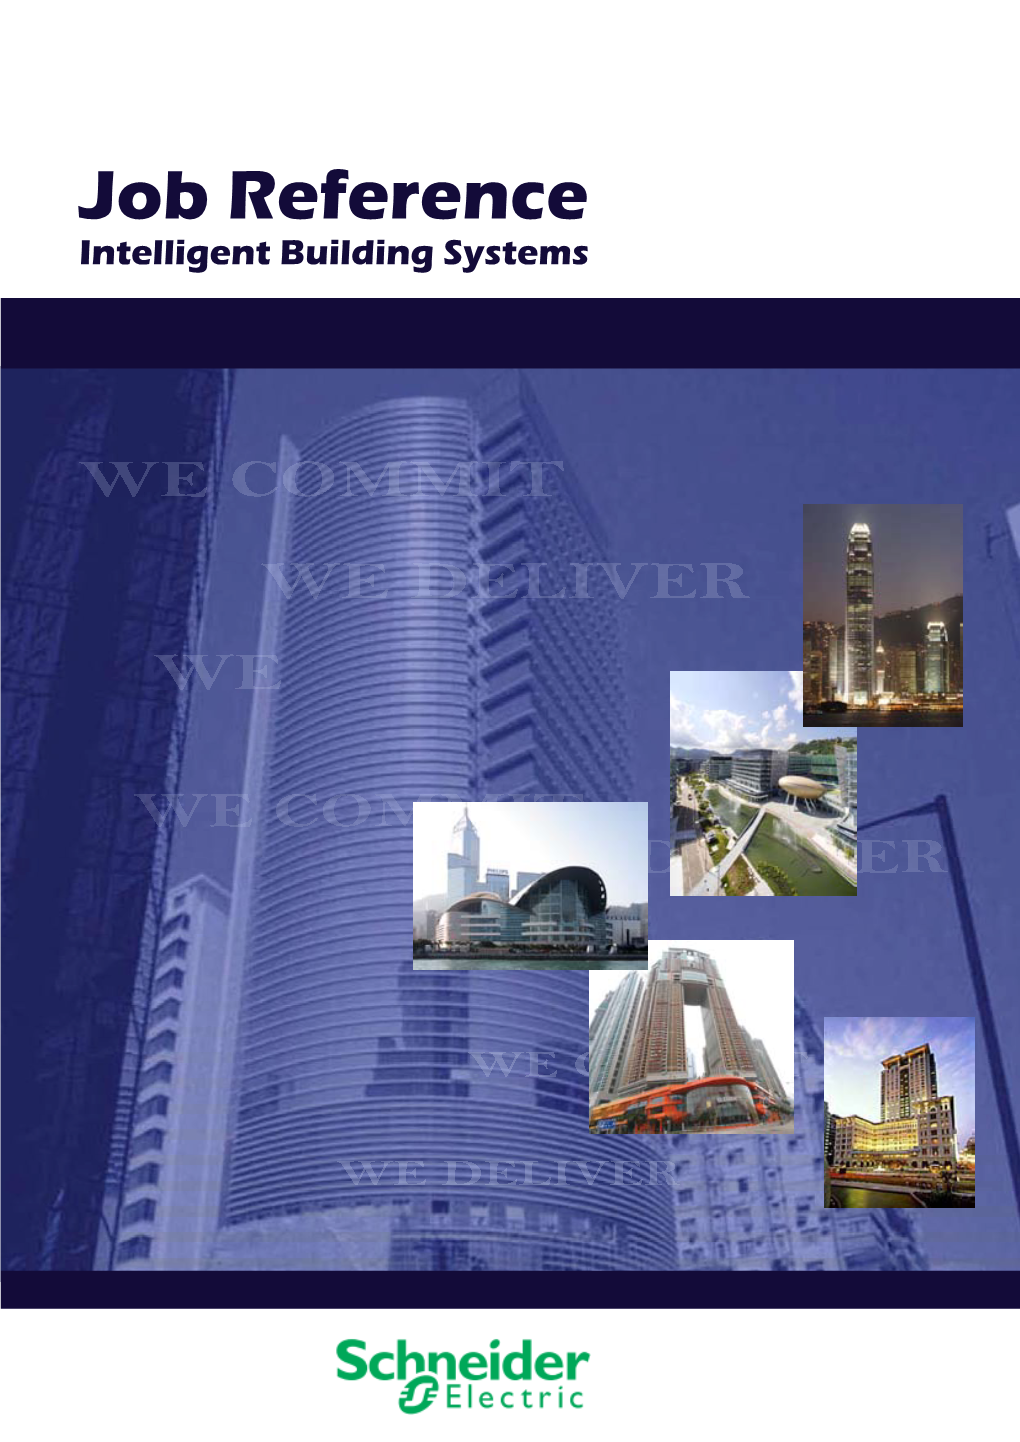 Job Reference Intelligent Building Systems